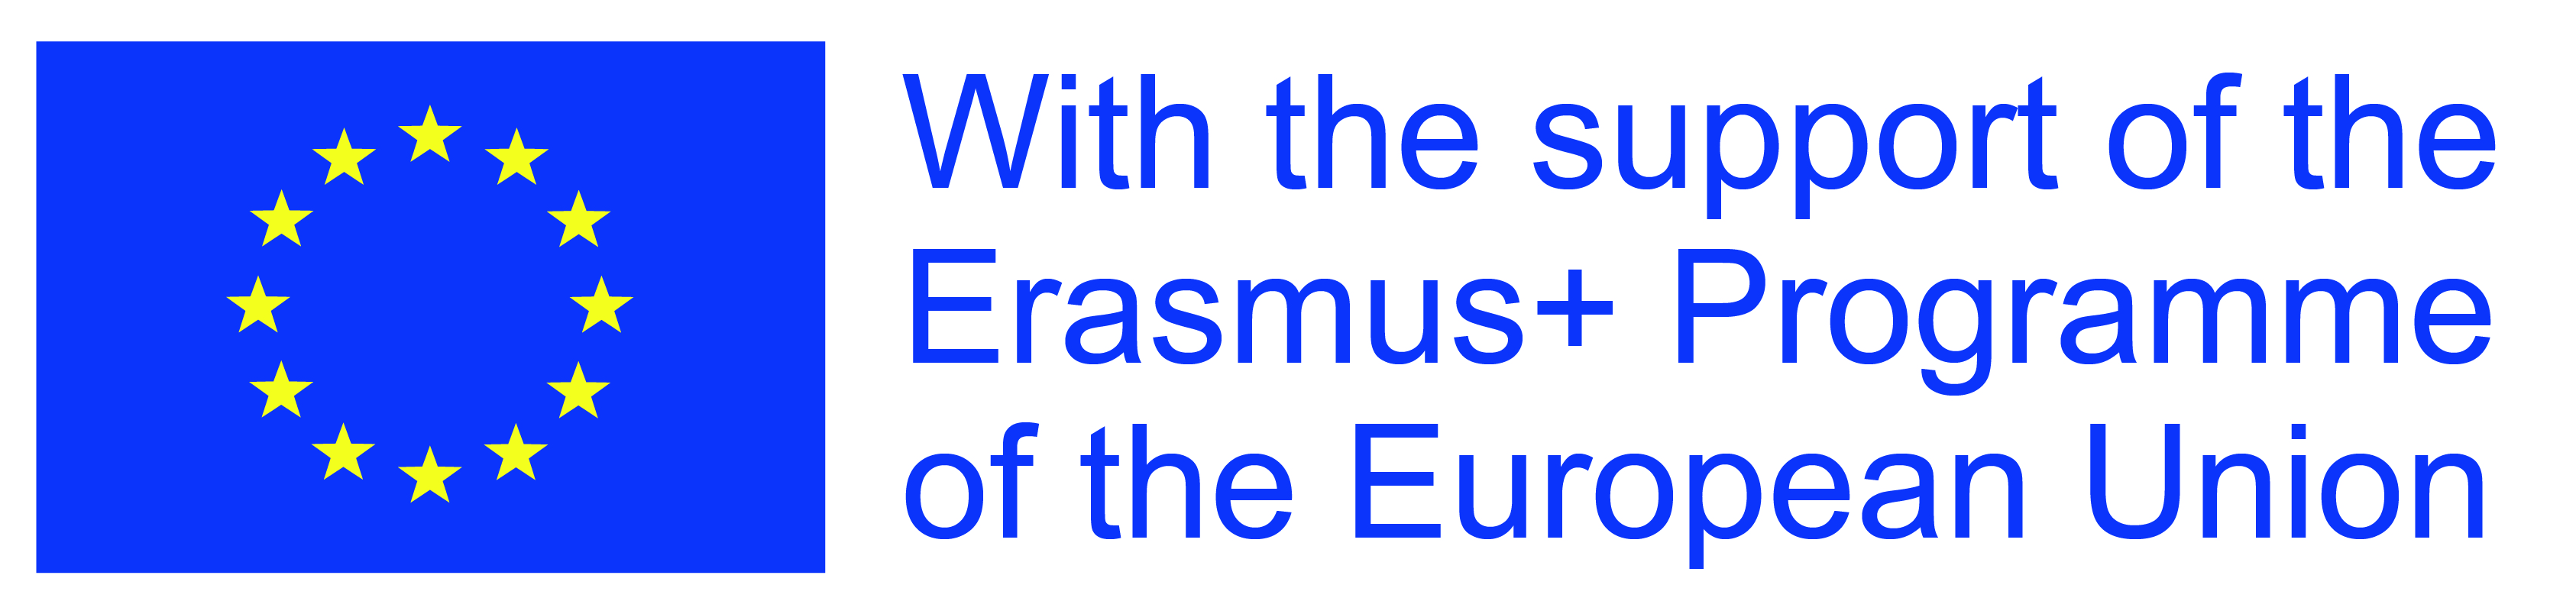 With the support of the Erasmus+ Programe of the European Union